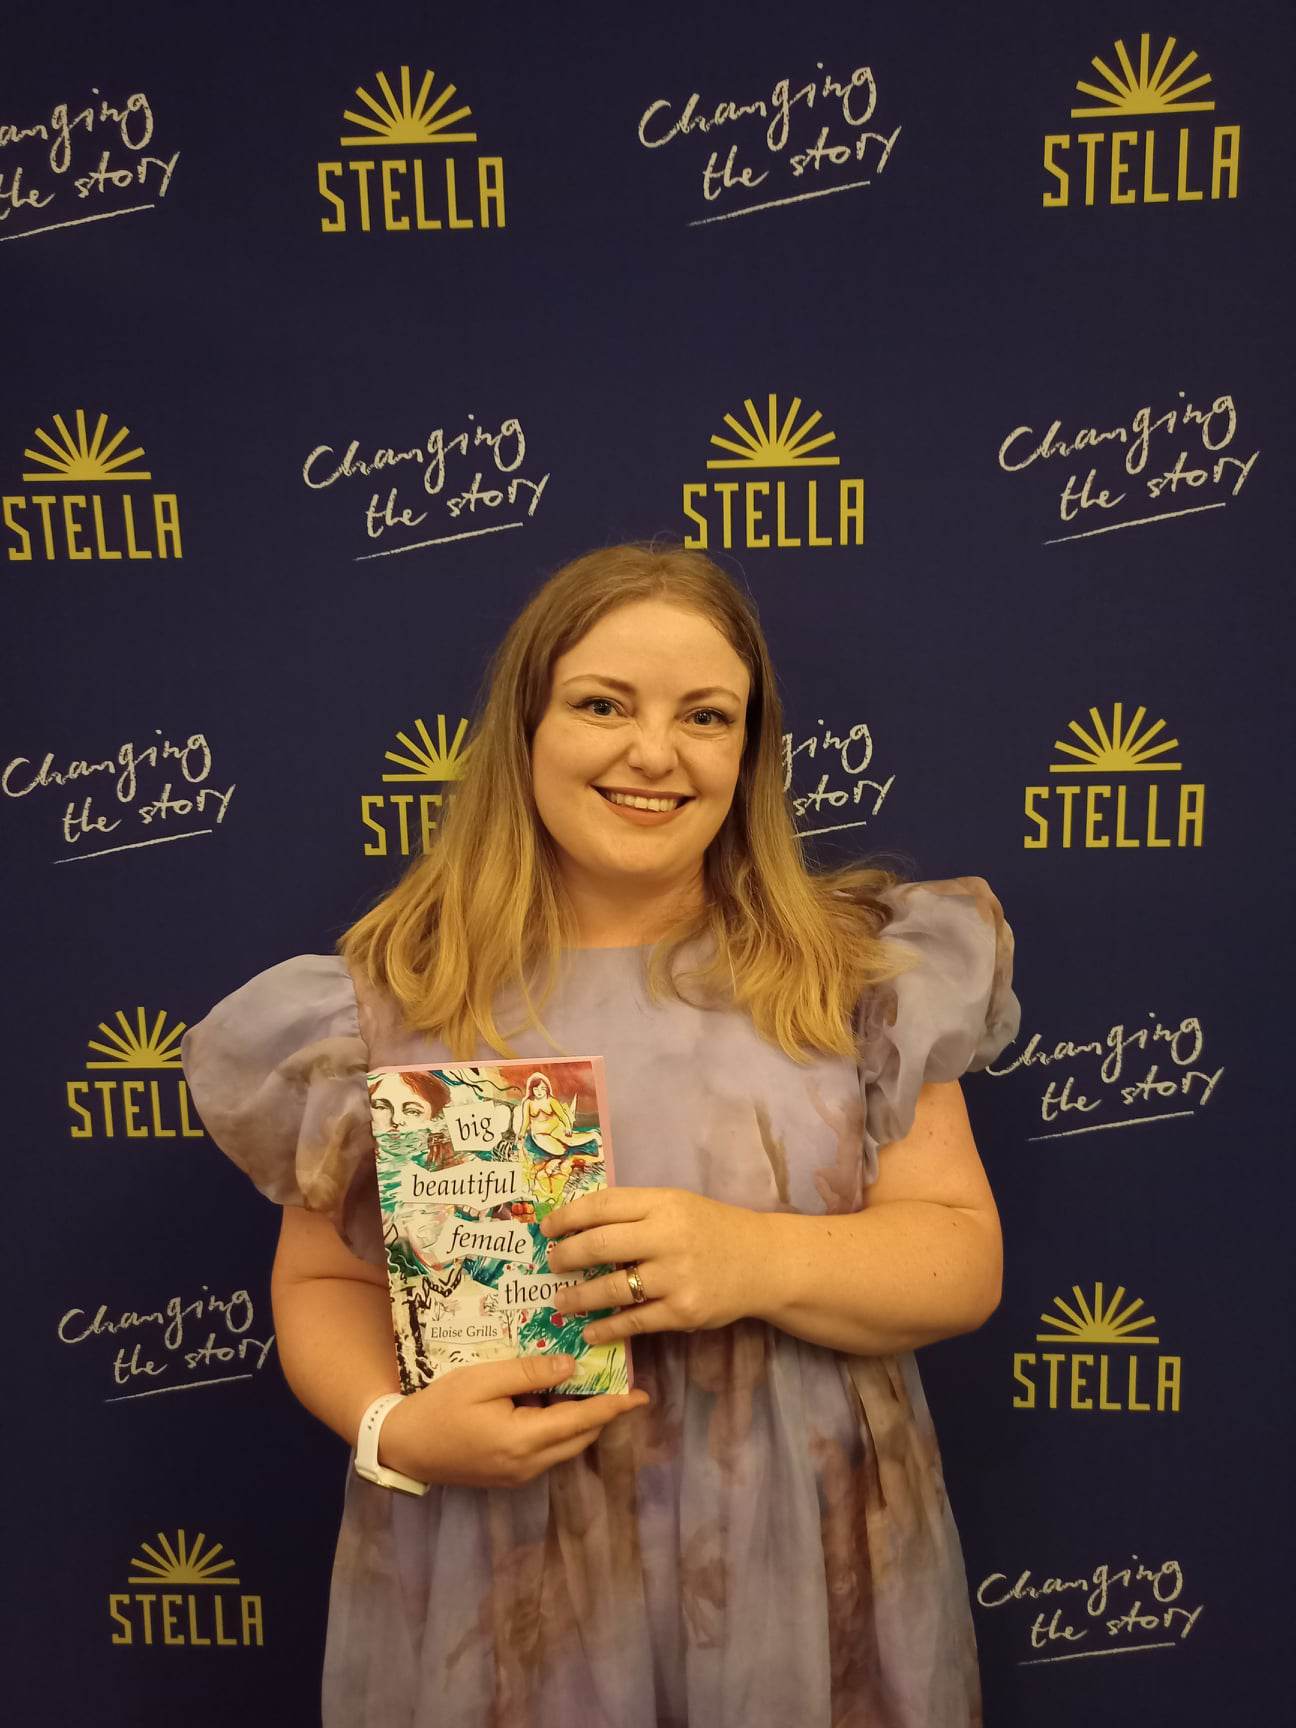 Eloise holding her book, big beautiful female theory, for the Stella Prize photo shoot.